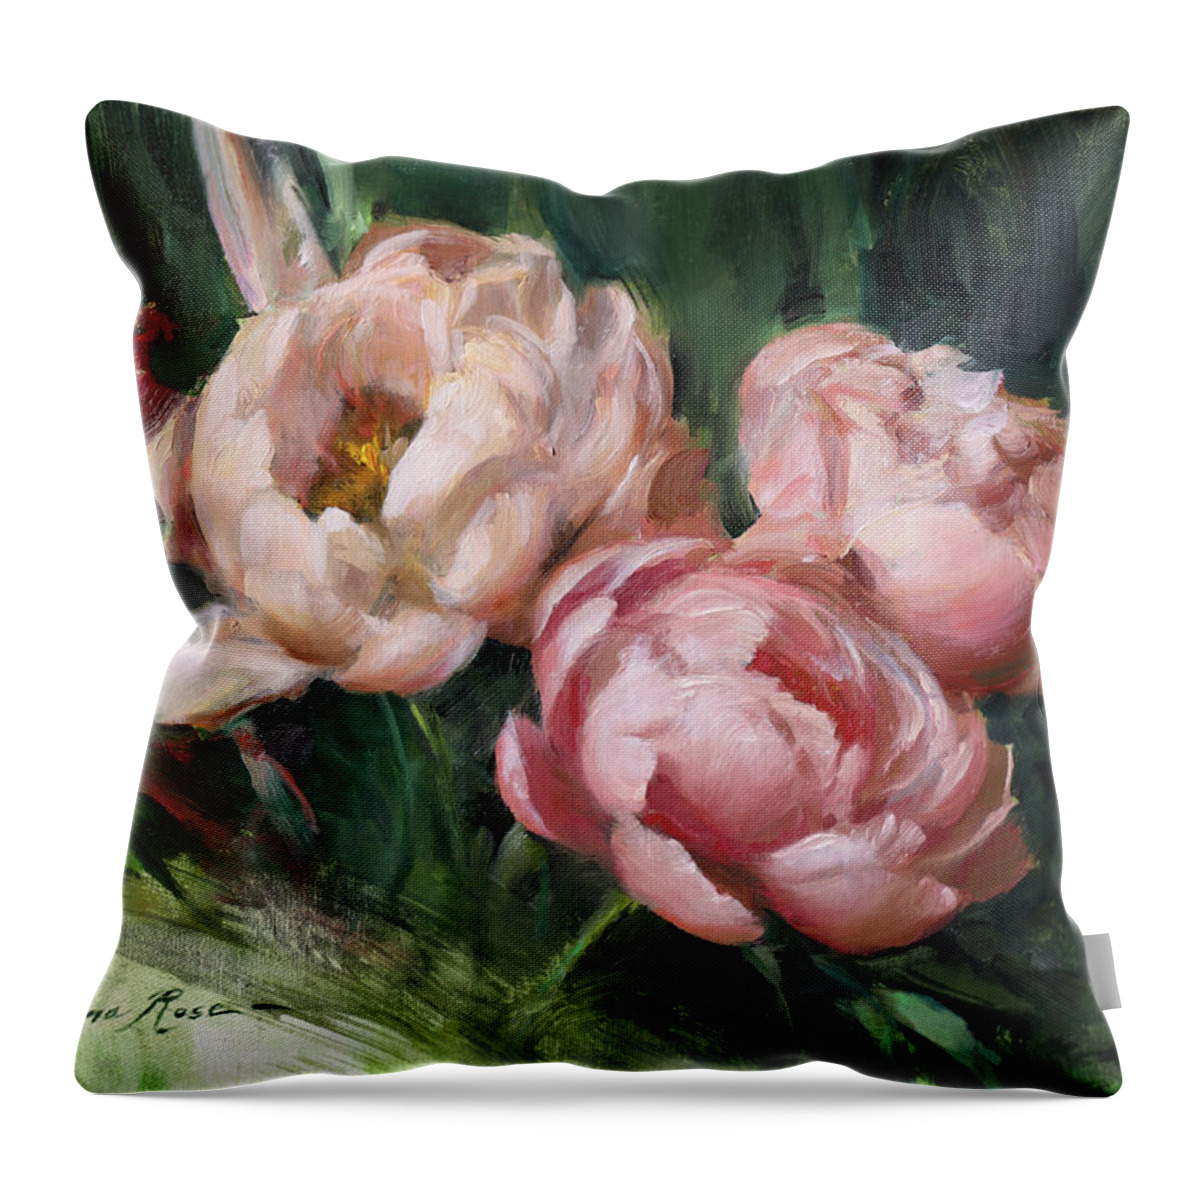 Peonies Throw Pillow featuring the painting Roses and Peonies by Anna Rose Bain